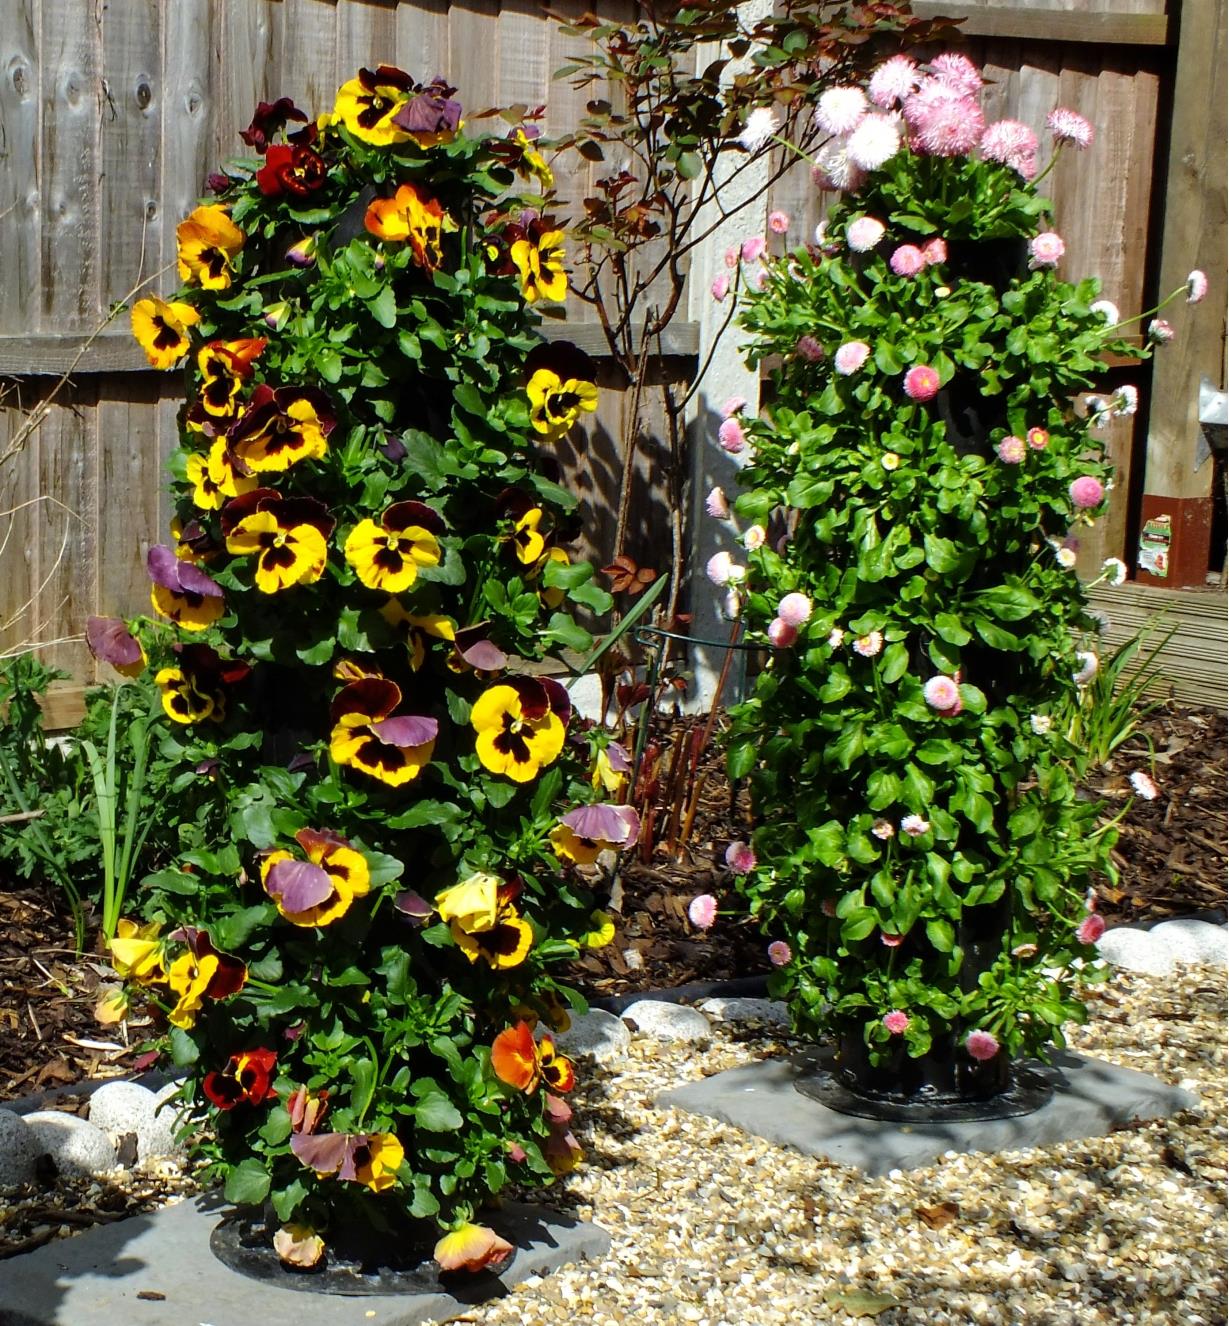 Pansies and English daisies growing in a pair of Flower Towers